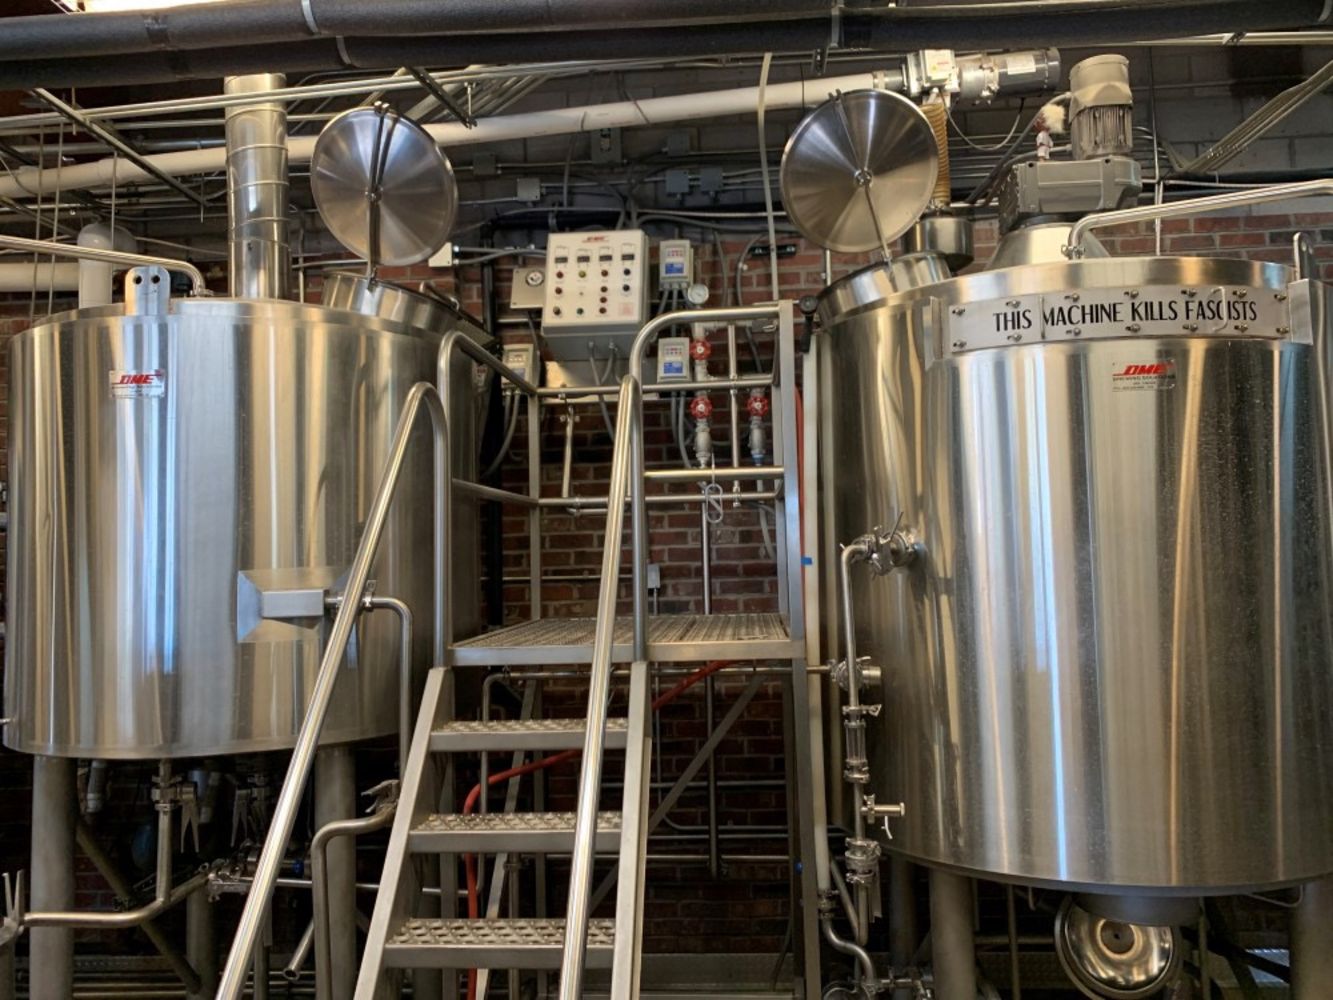 2014 Microbrewery - Scottsdale Beer Company: 10 BBL Brewhouse, Fermenters, Brite Tanks, CIP, Keg Washer